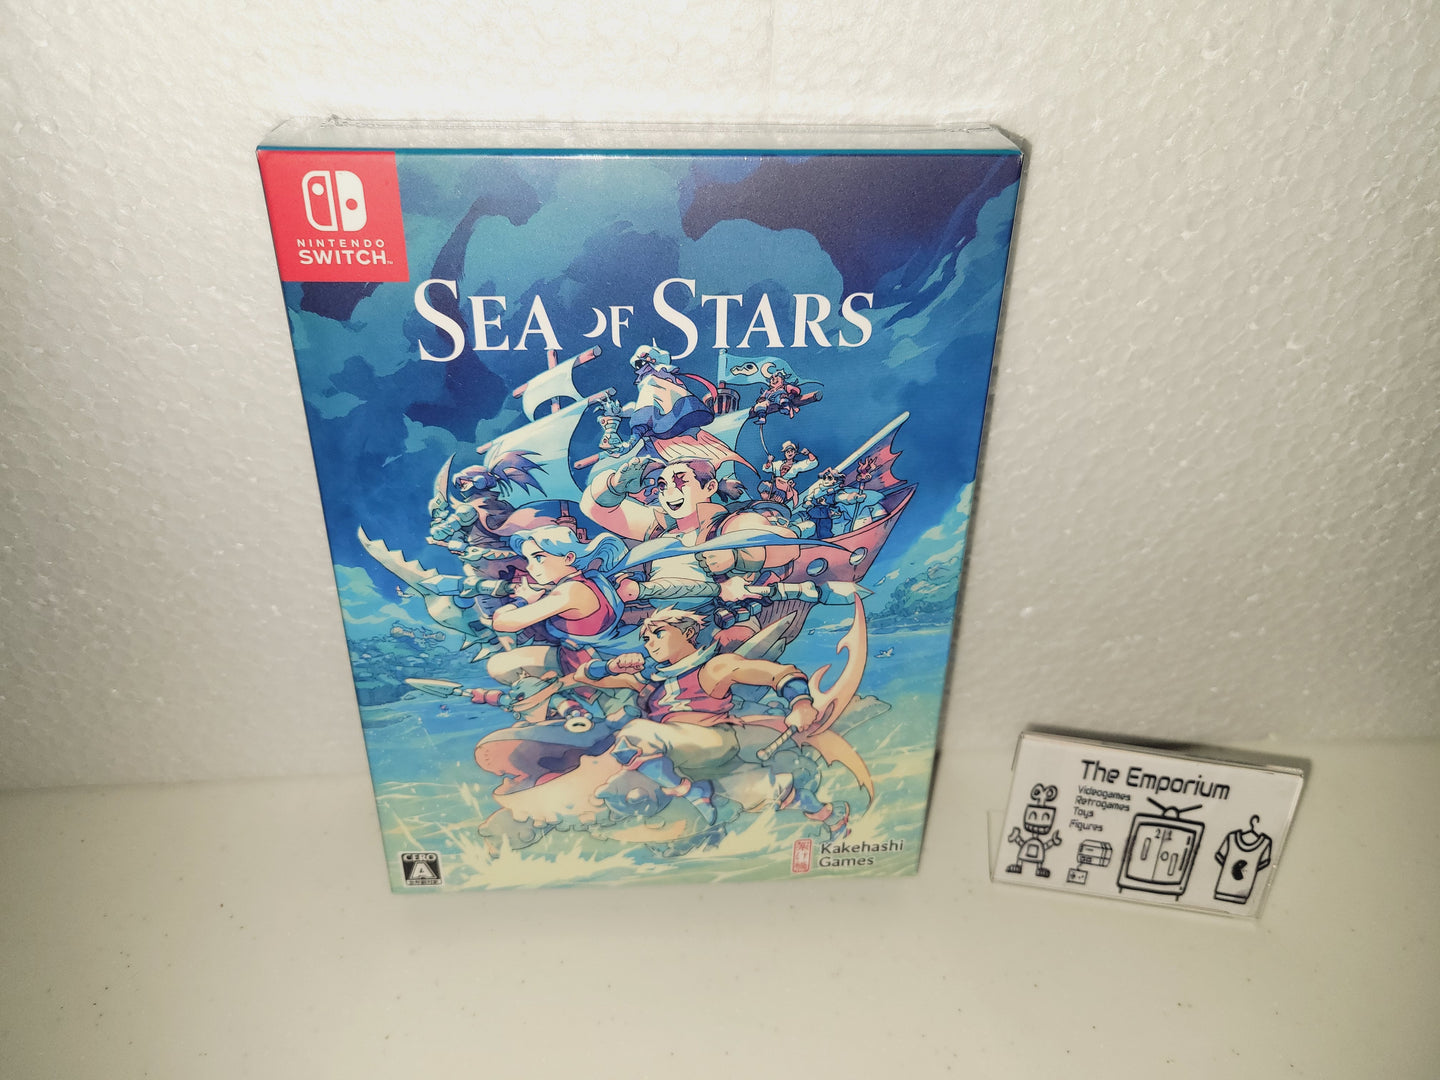 Sea of Stars limited edition - Nintendo Switch NSW